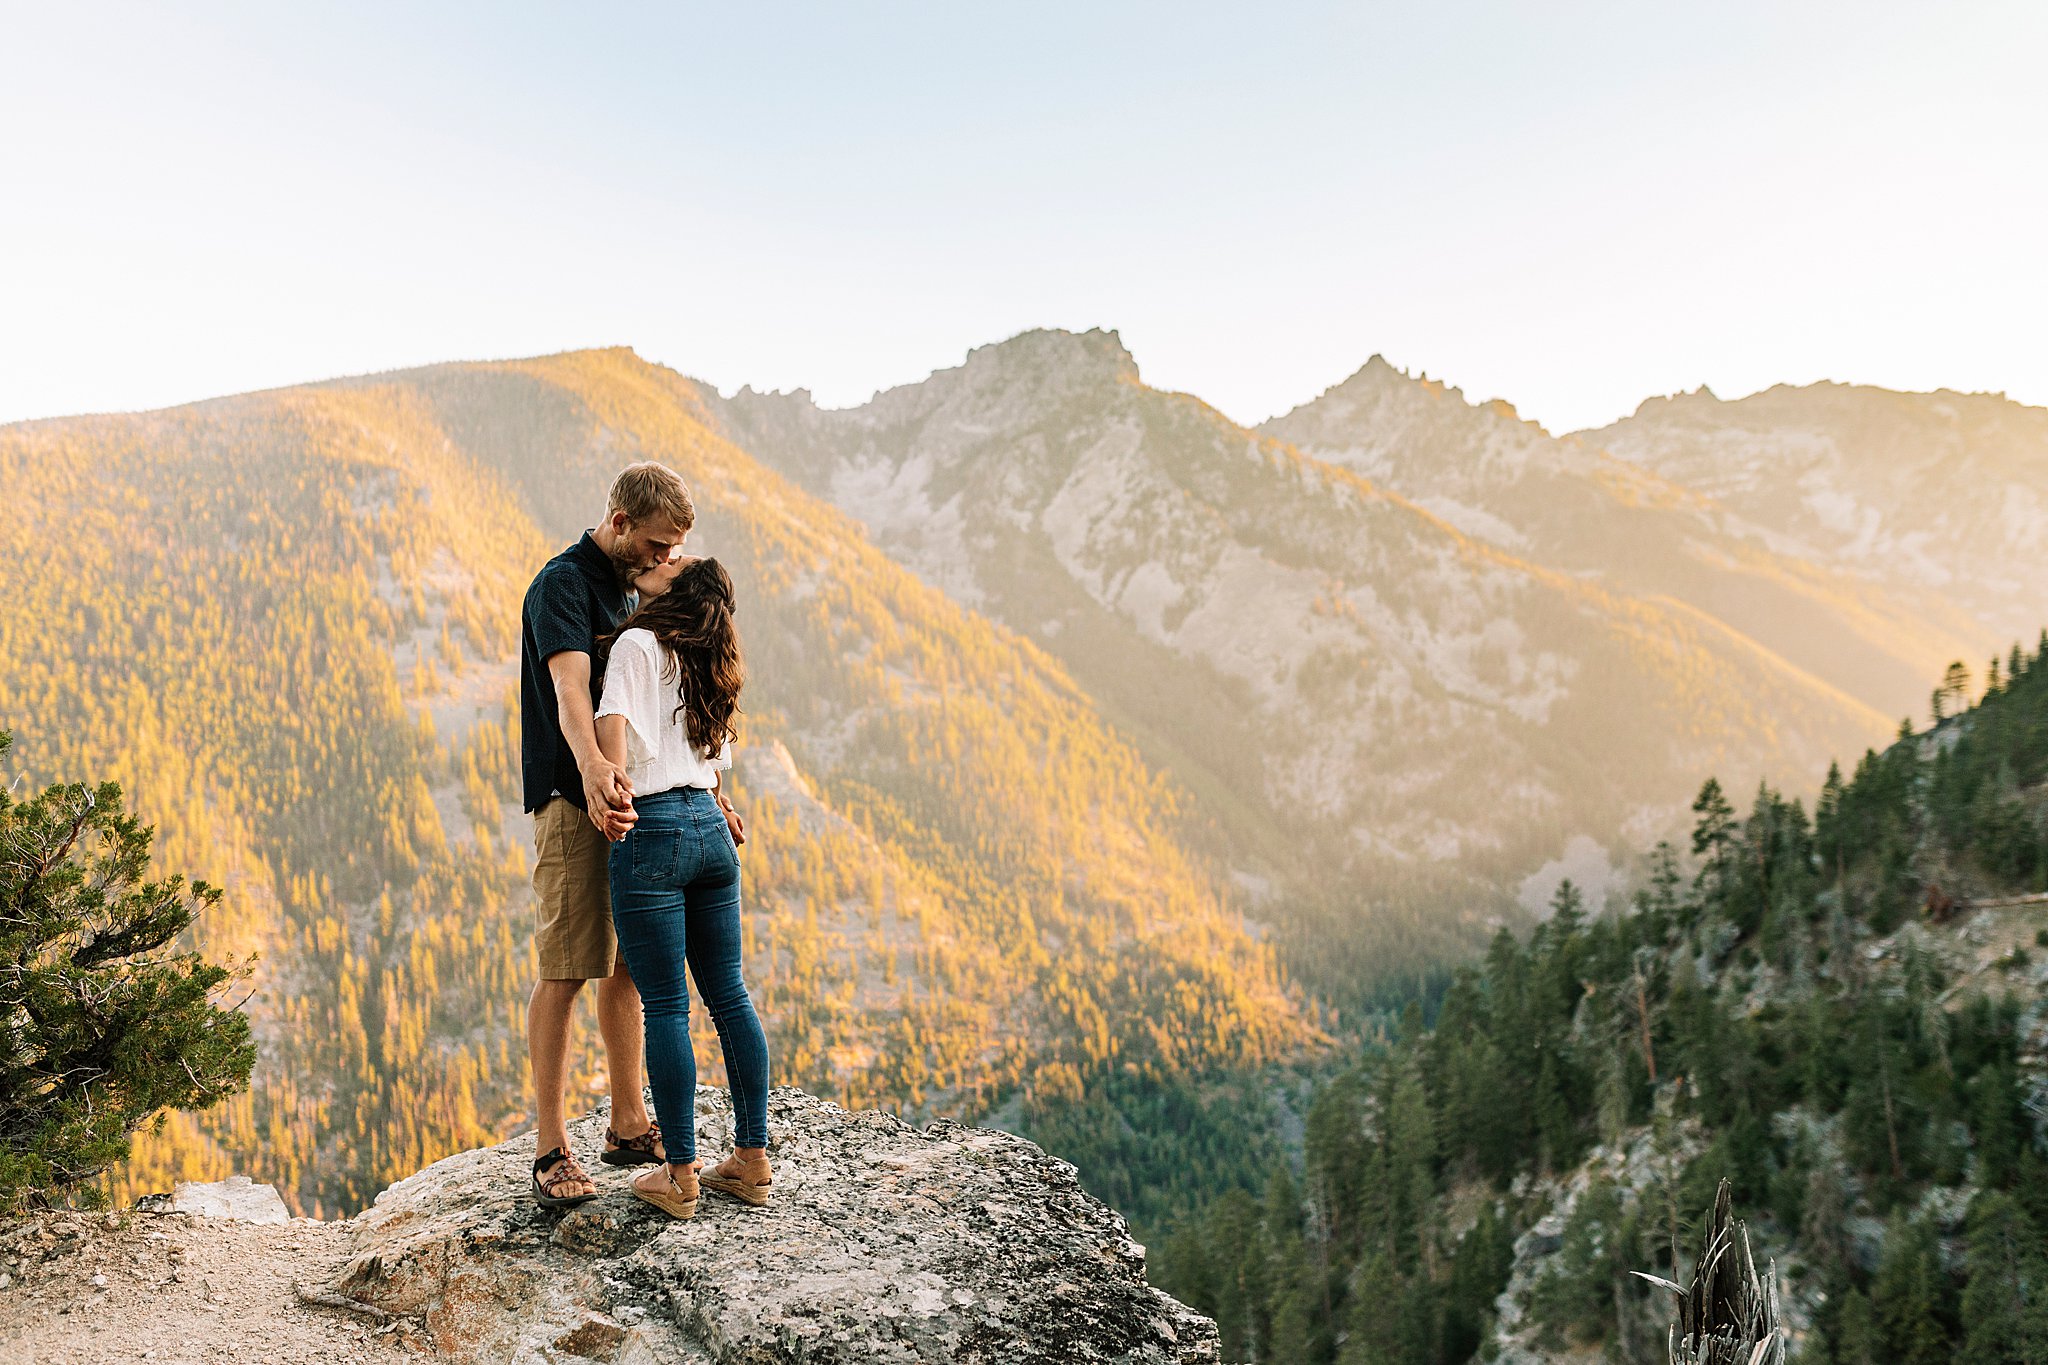 engagment session in mountains, fun mountain photoshoot, golden hour engagement session, missoul wedding photographer, Missoula blue mountain photoshoot, missoula montana, missoula wedding photograpger, montana engagement, montana mountain photoshoot, montana mountains, Montana photographer, montana photoshoot, montana wedding photographer, mountain engagement, mountain engagment, mountain photoshoot, sunset engagement session